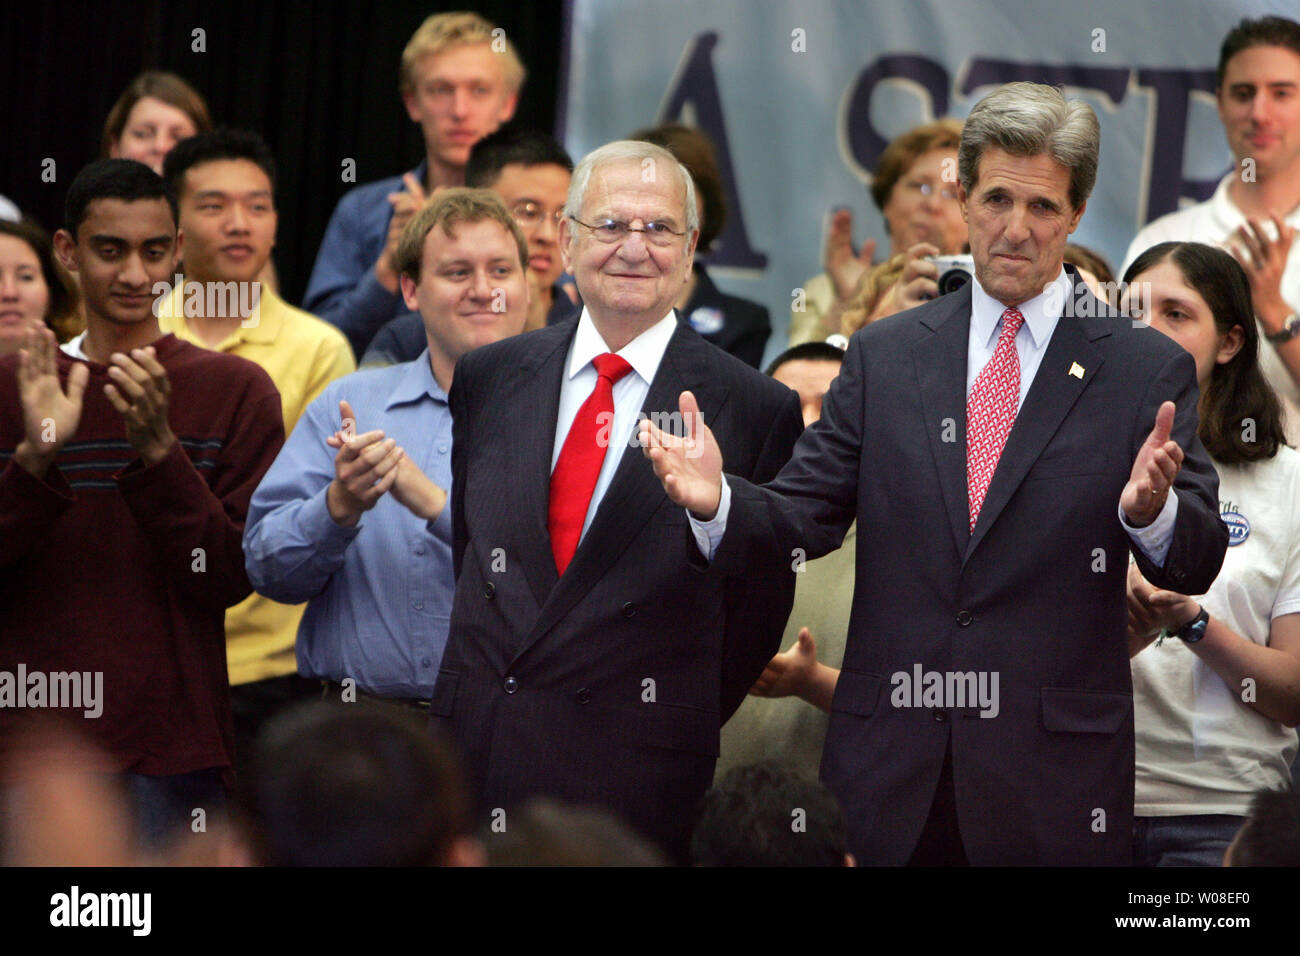 Former Chrysler Motors Chairman Lee Iacocca (L) appears at a campaign rally with Democratic presidential candidate, U.S. Senator John Kerry at San Jose State University in San Jose, CA on June 24, 2004.   (UPI Photo/Terry Schmitt) Stock Photo